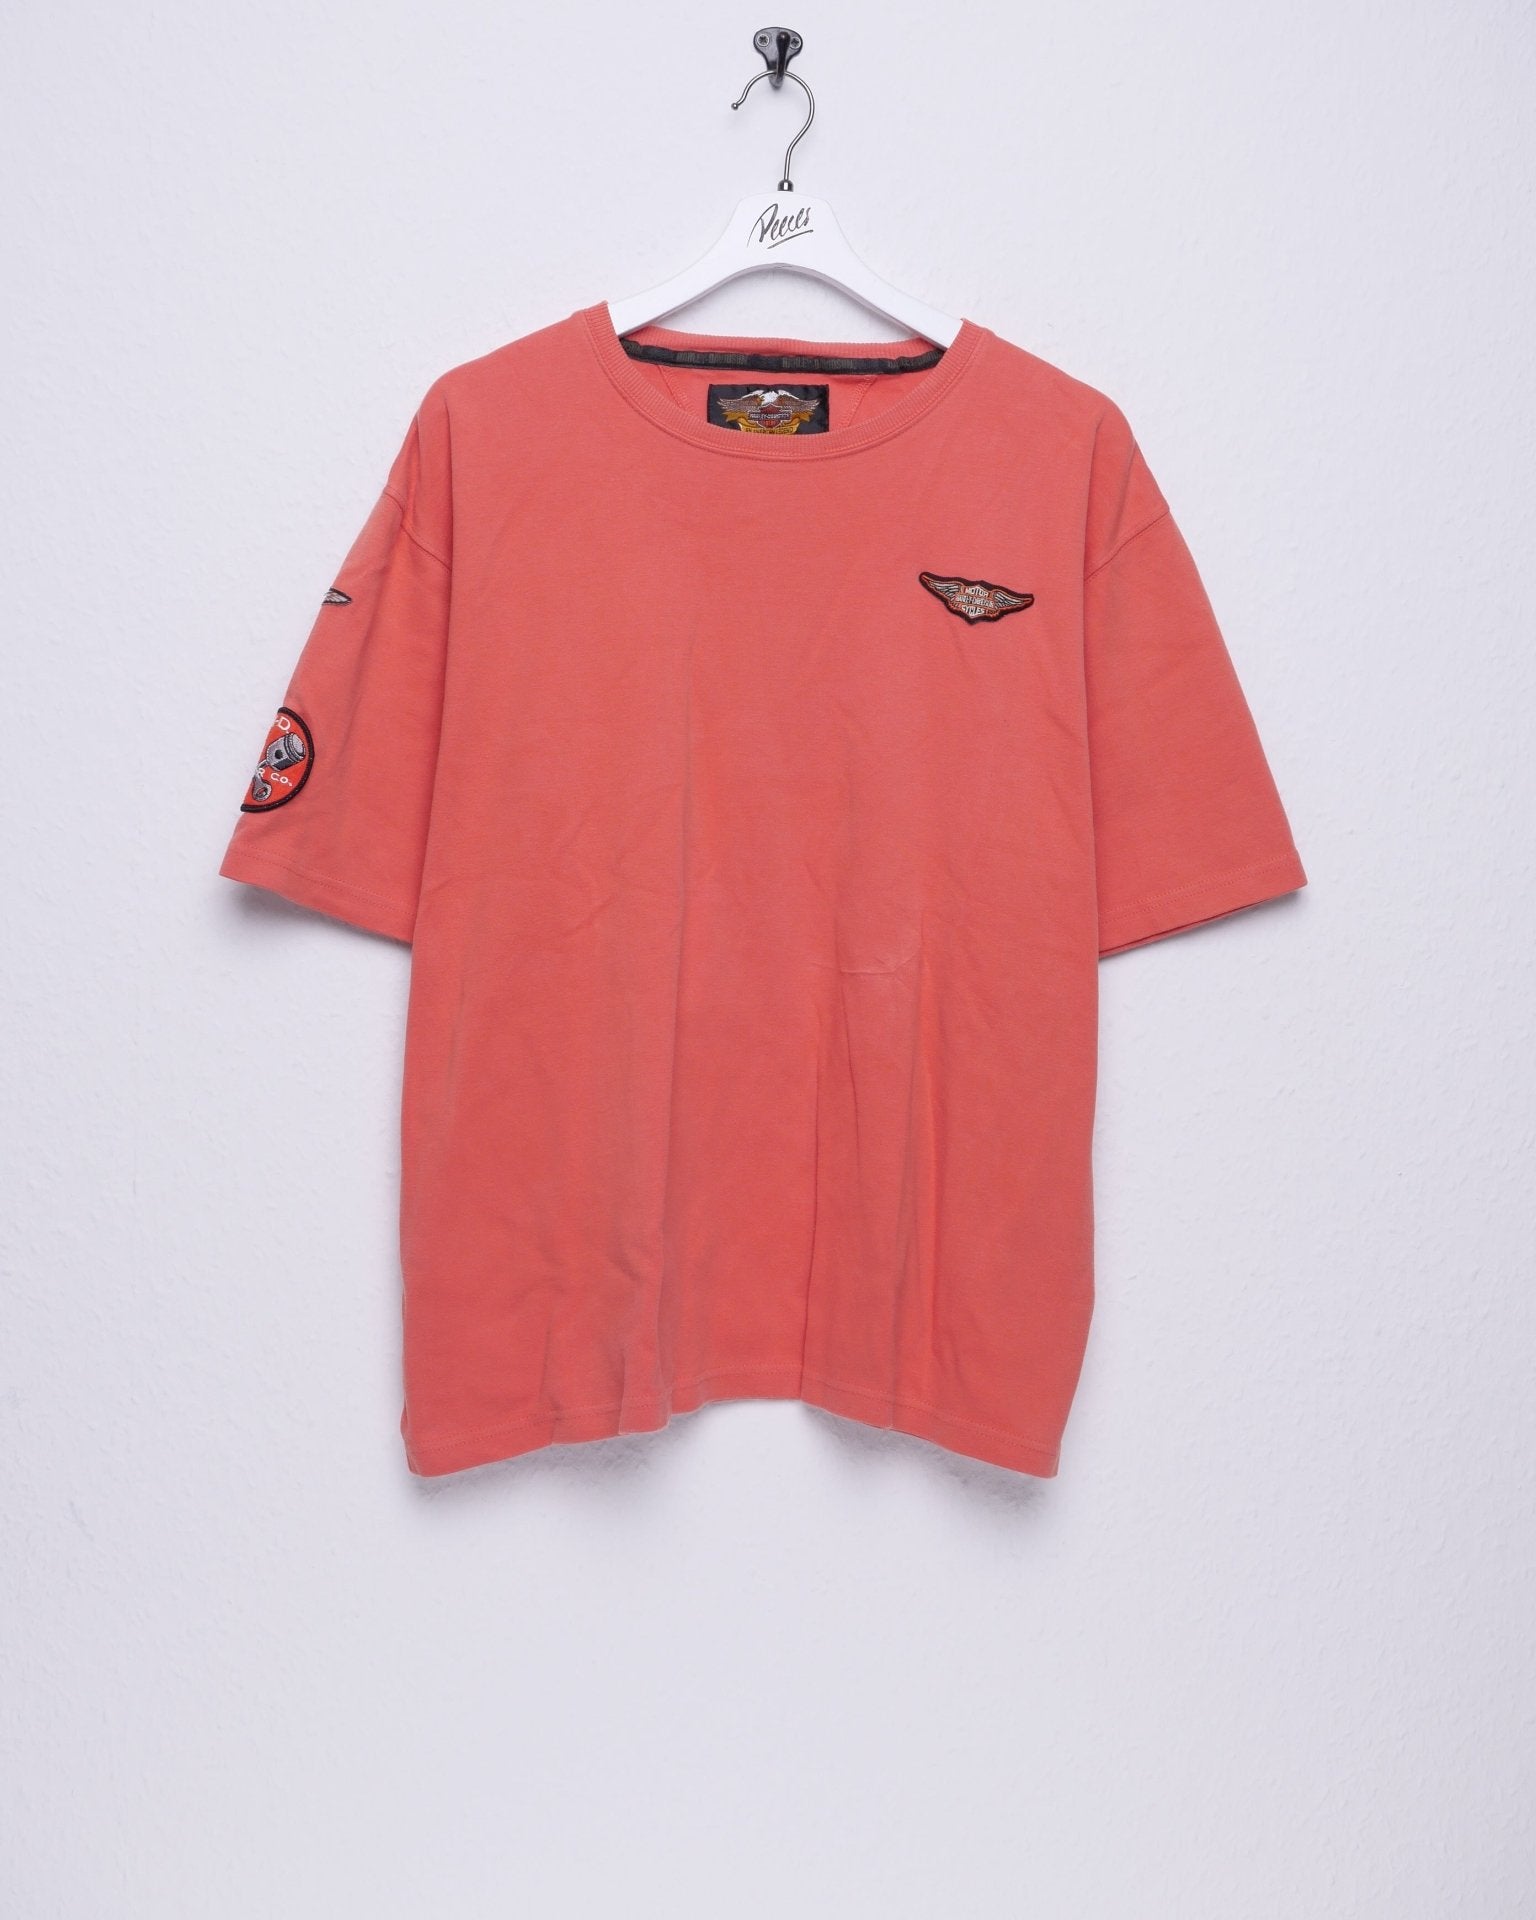 harley embroidered Patch orange Shirt - Peeces